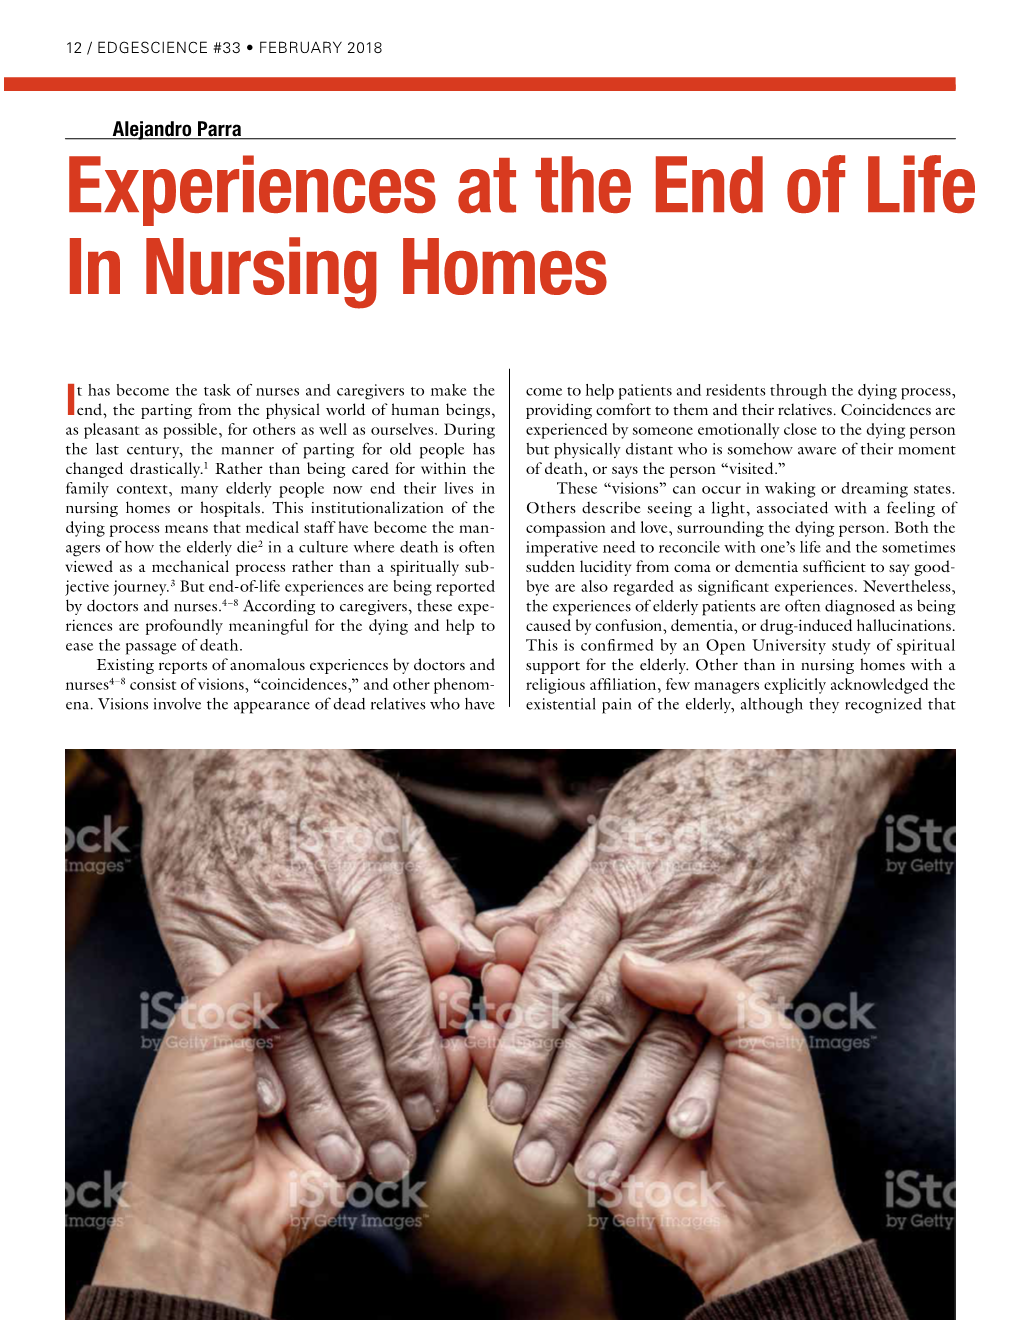 Experiences at the End of Life in Nursing Homes